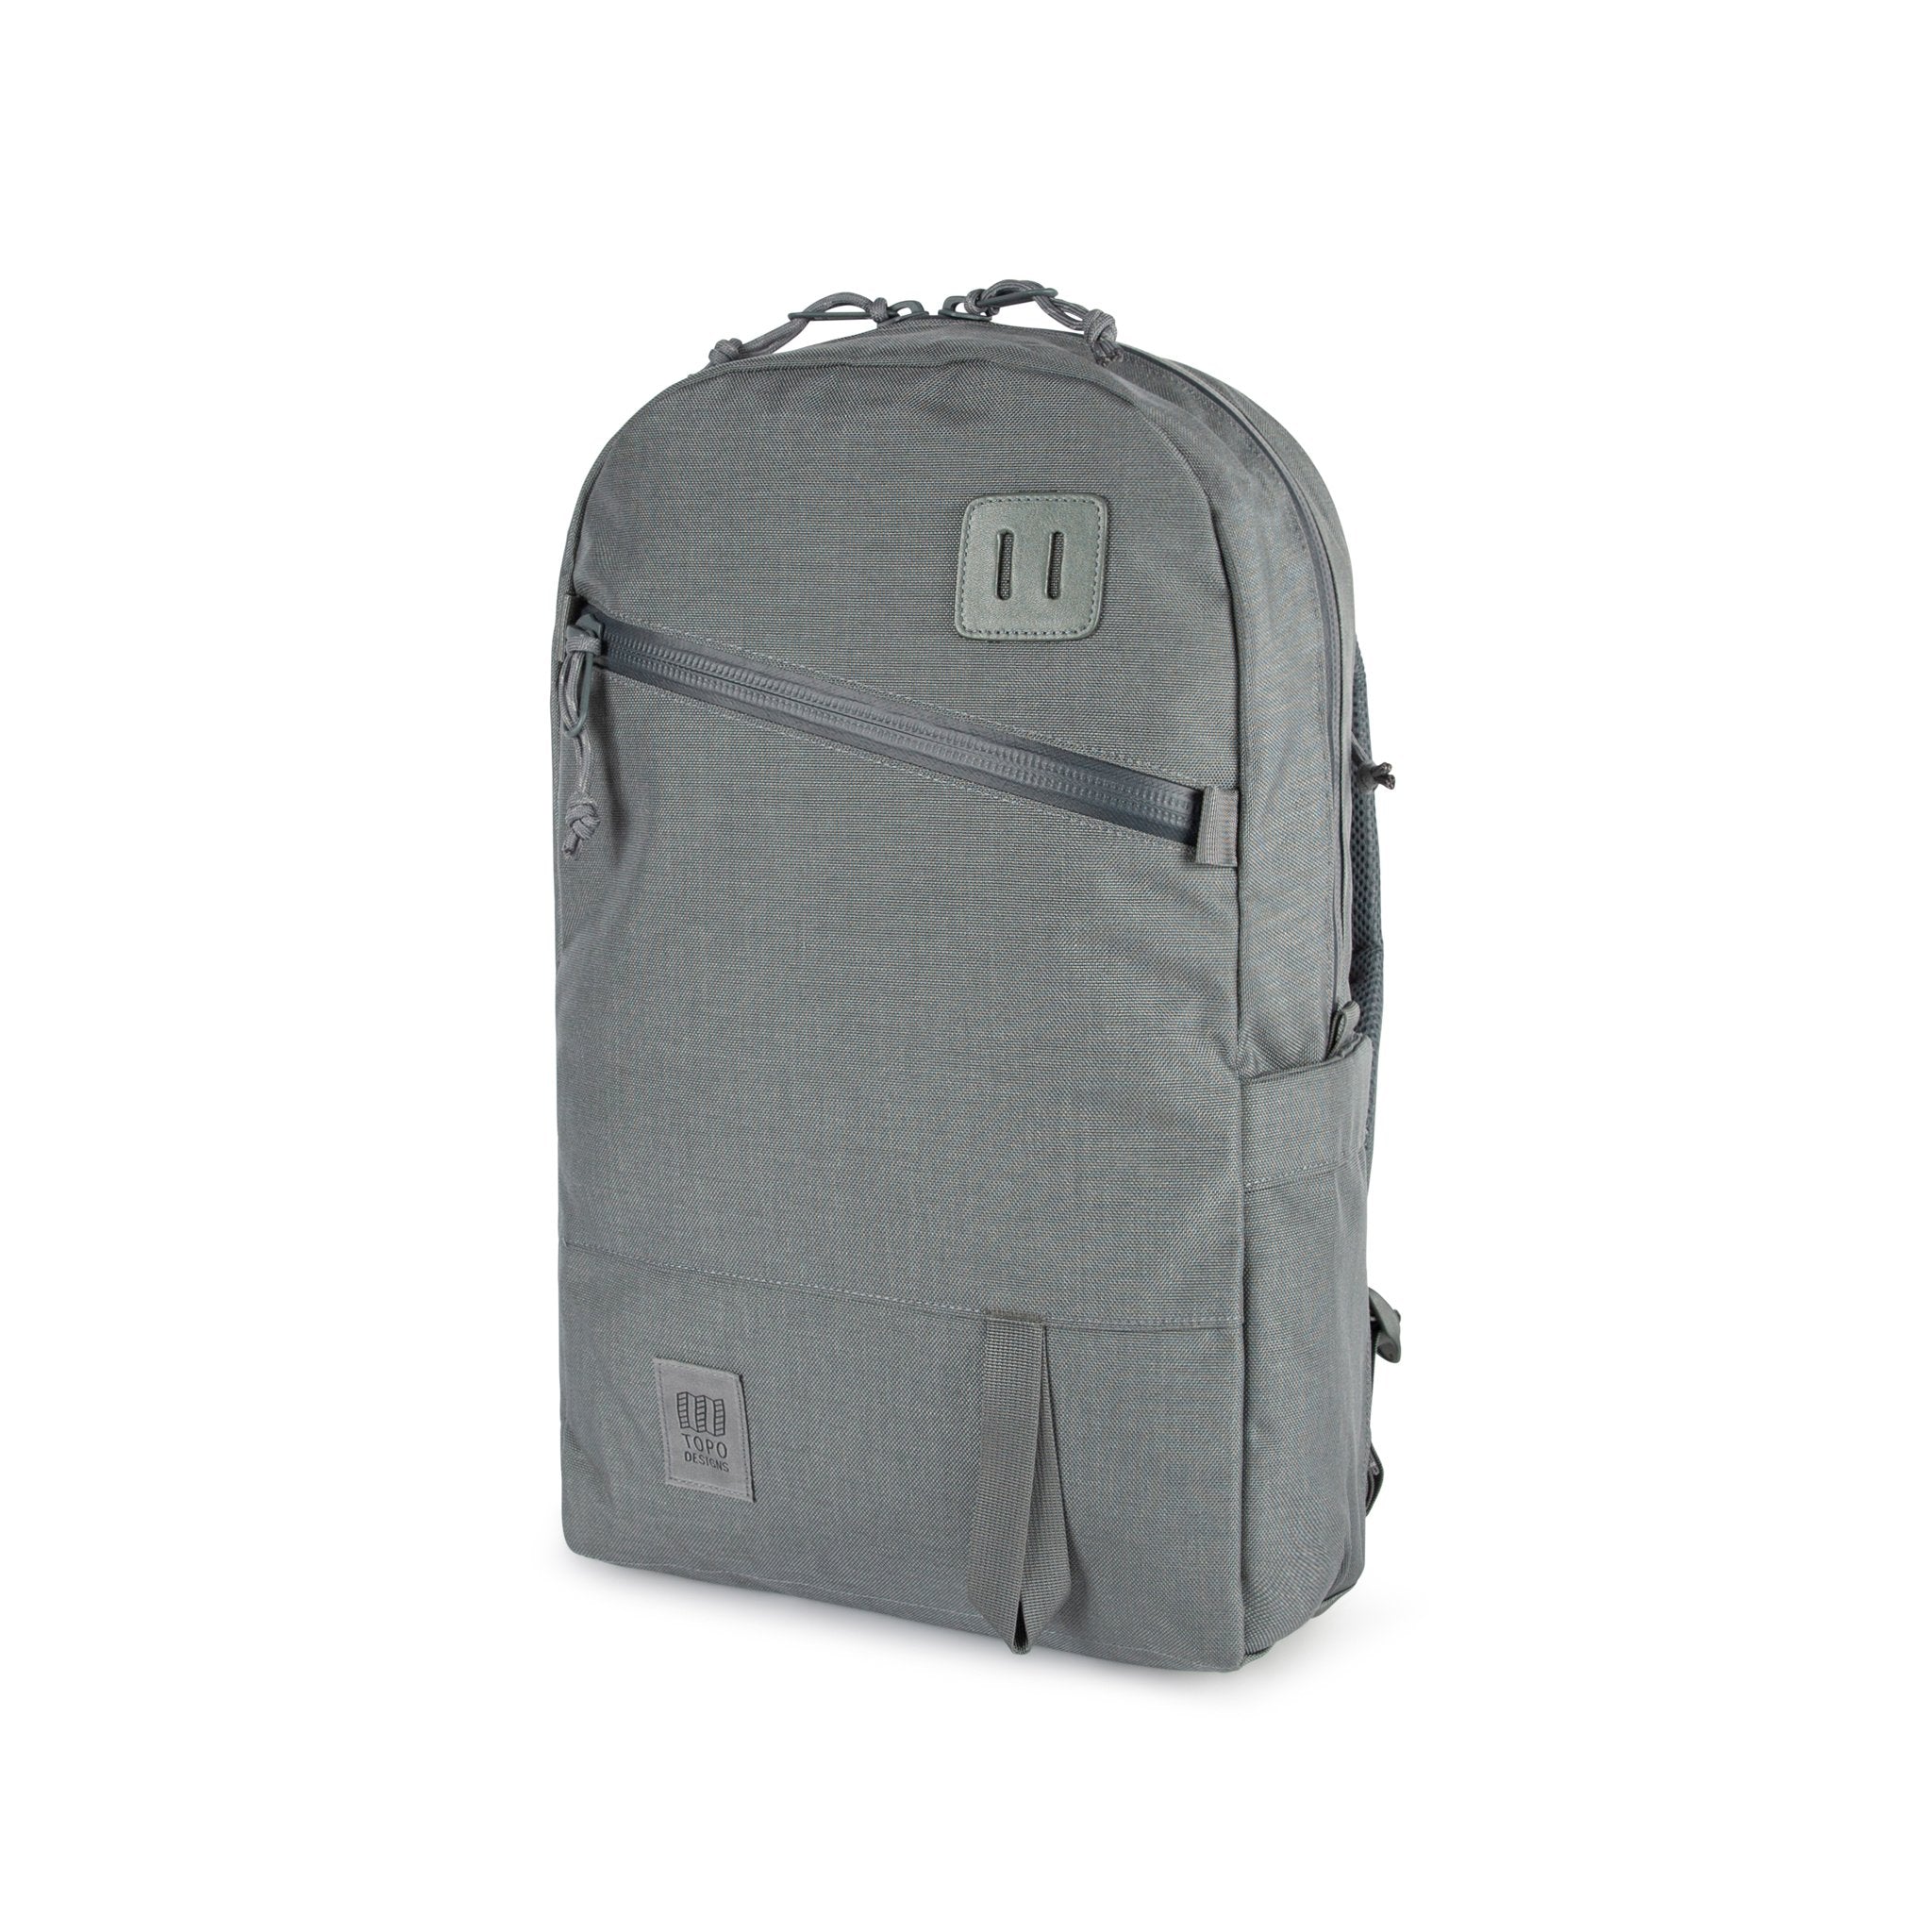 Topo Designs Daypack Tech 100% recycled nylon backpack with external laptop access in "Charcoal" gray.